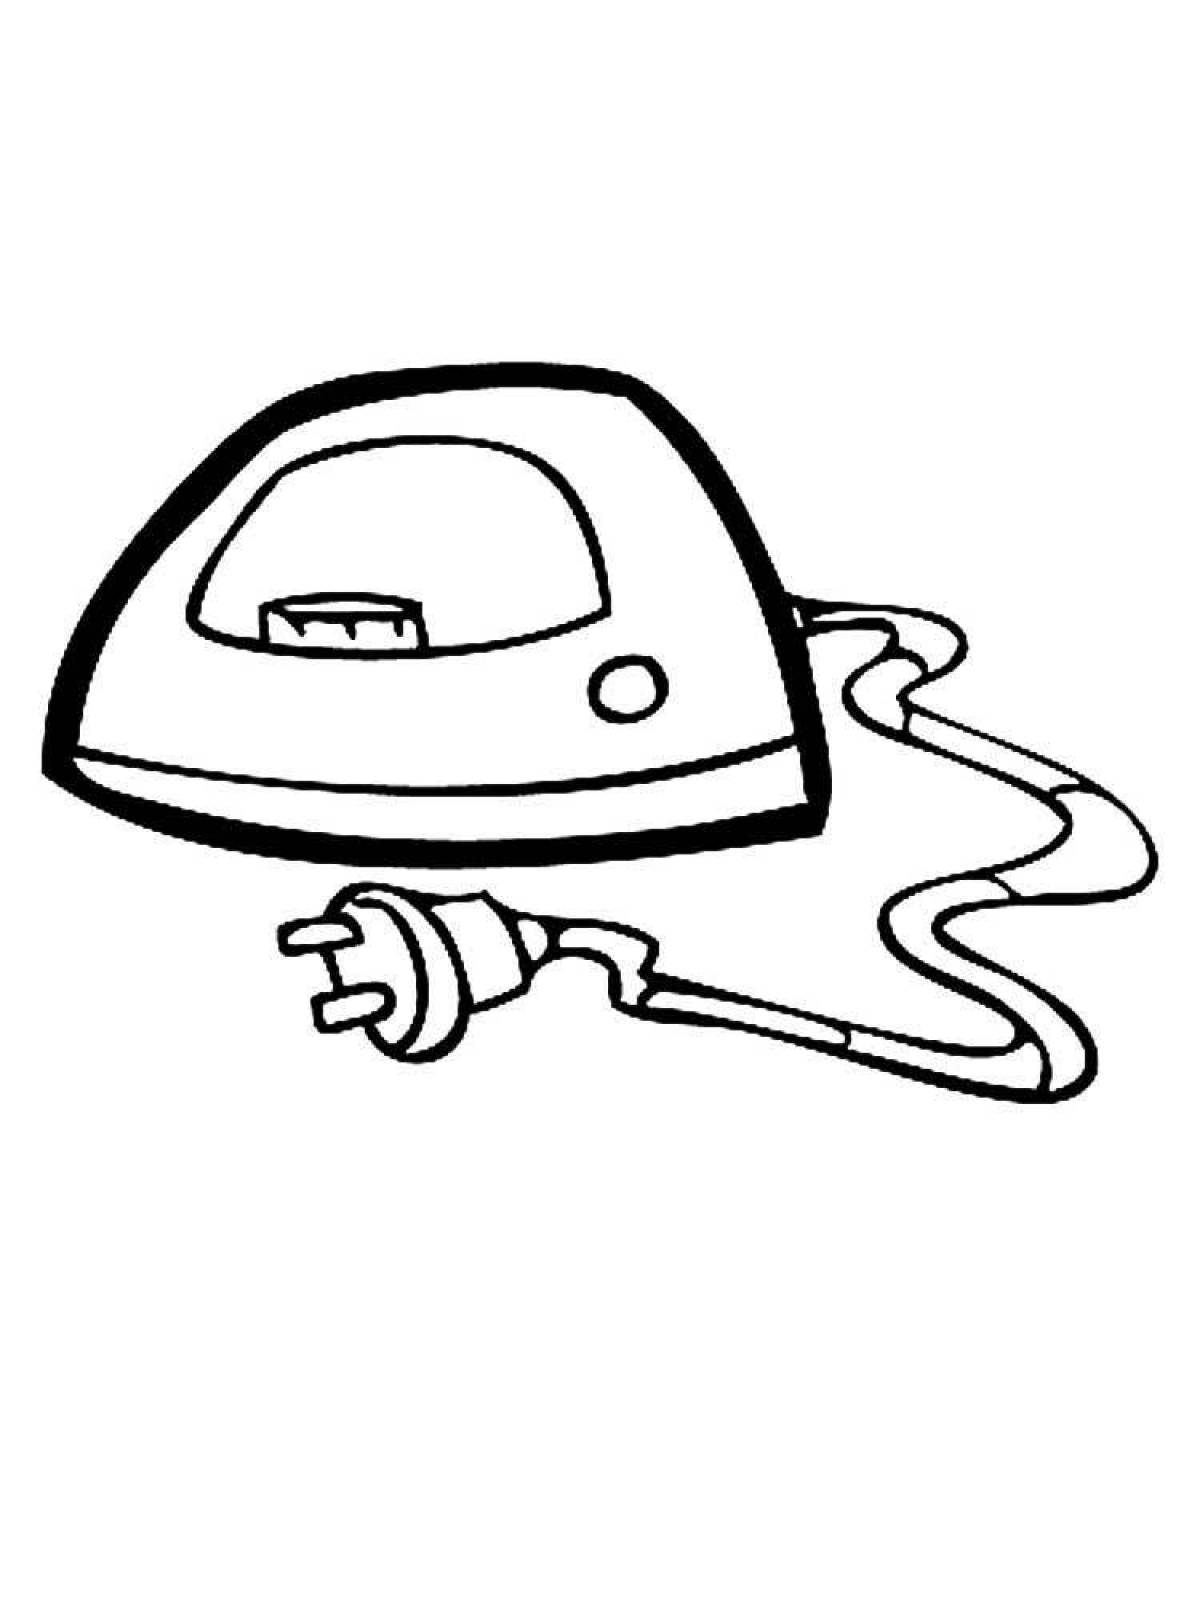 Attractive Electrical Appliances Coloring Page